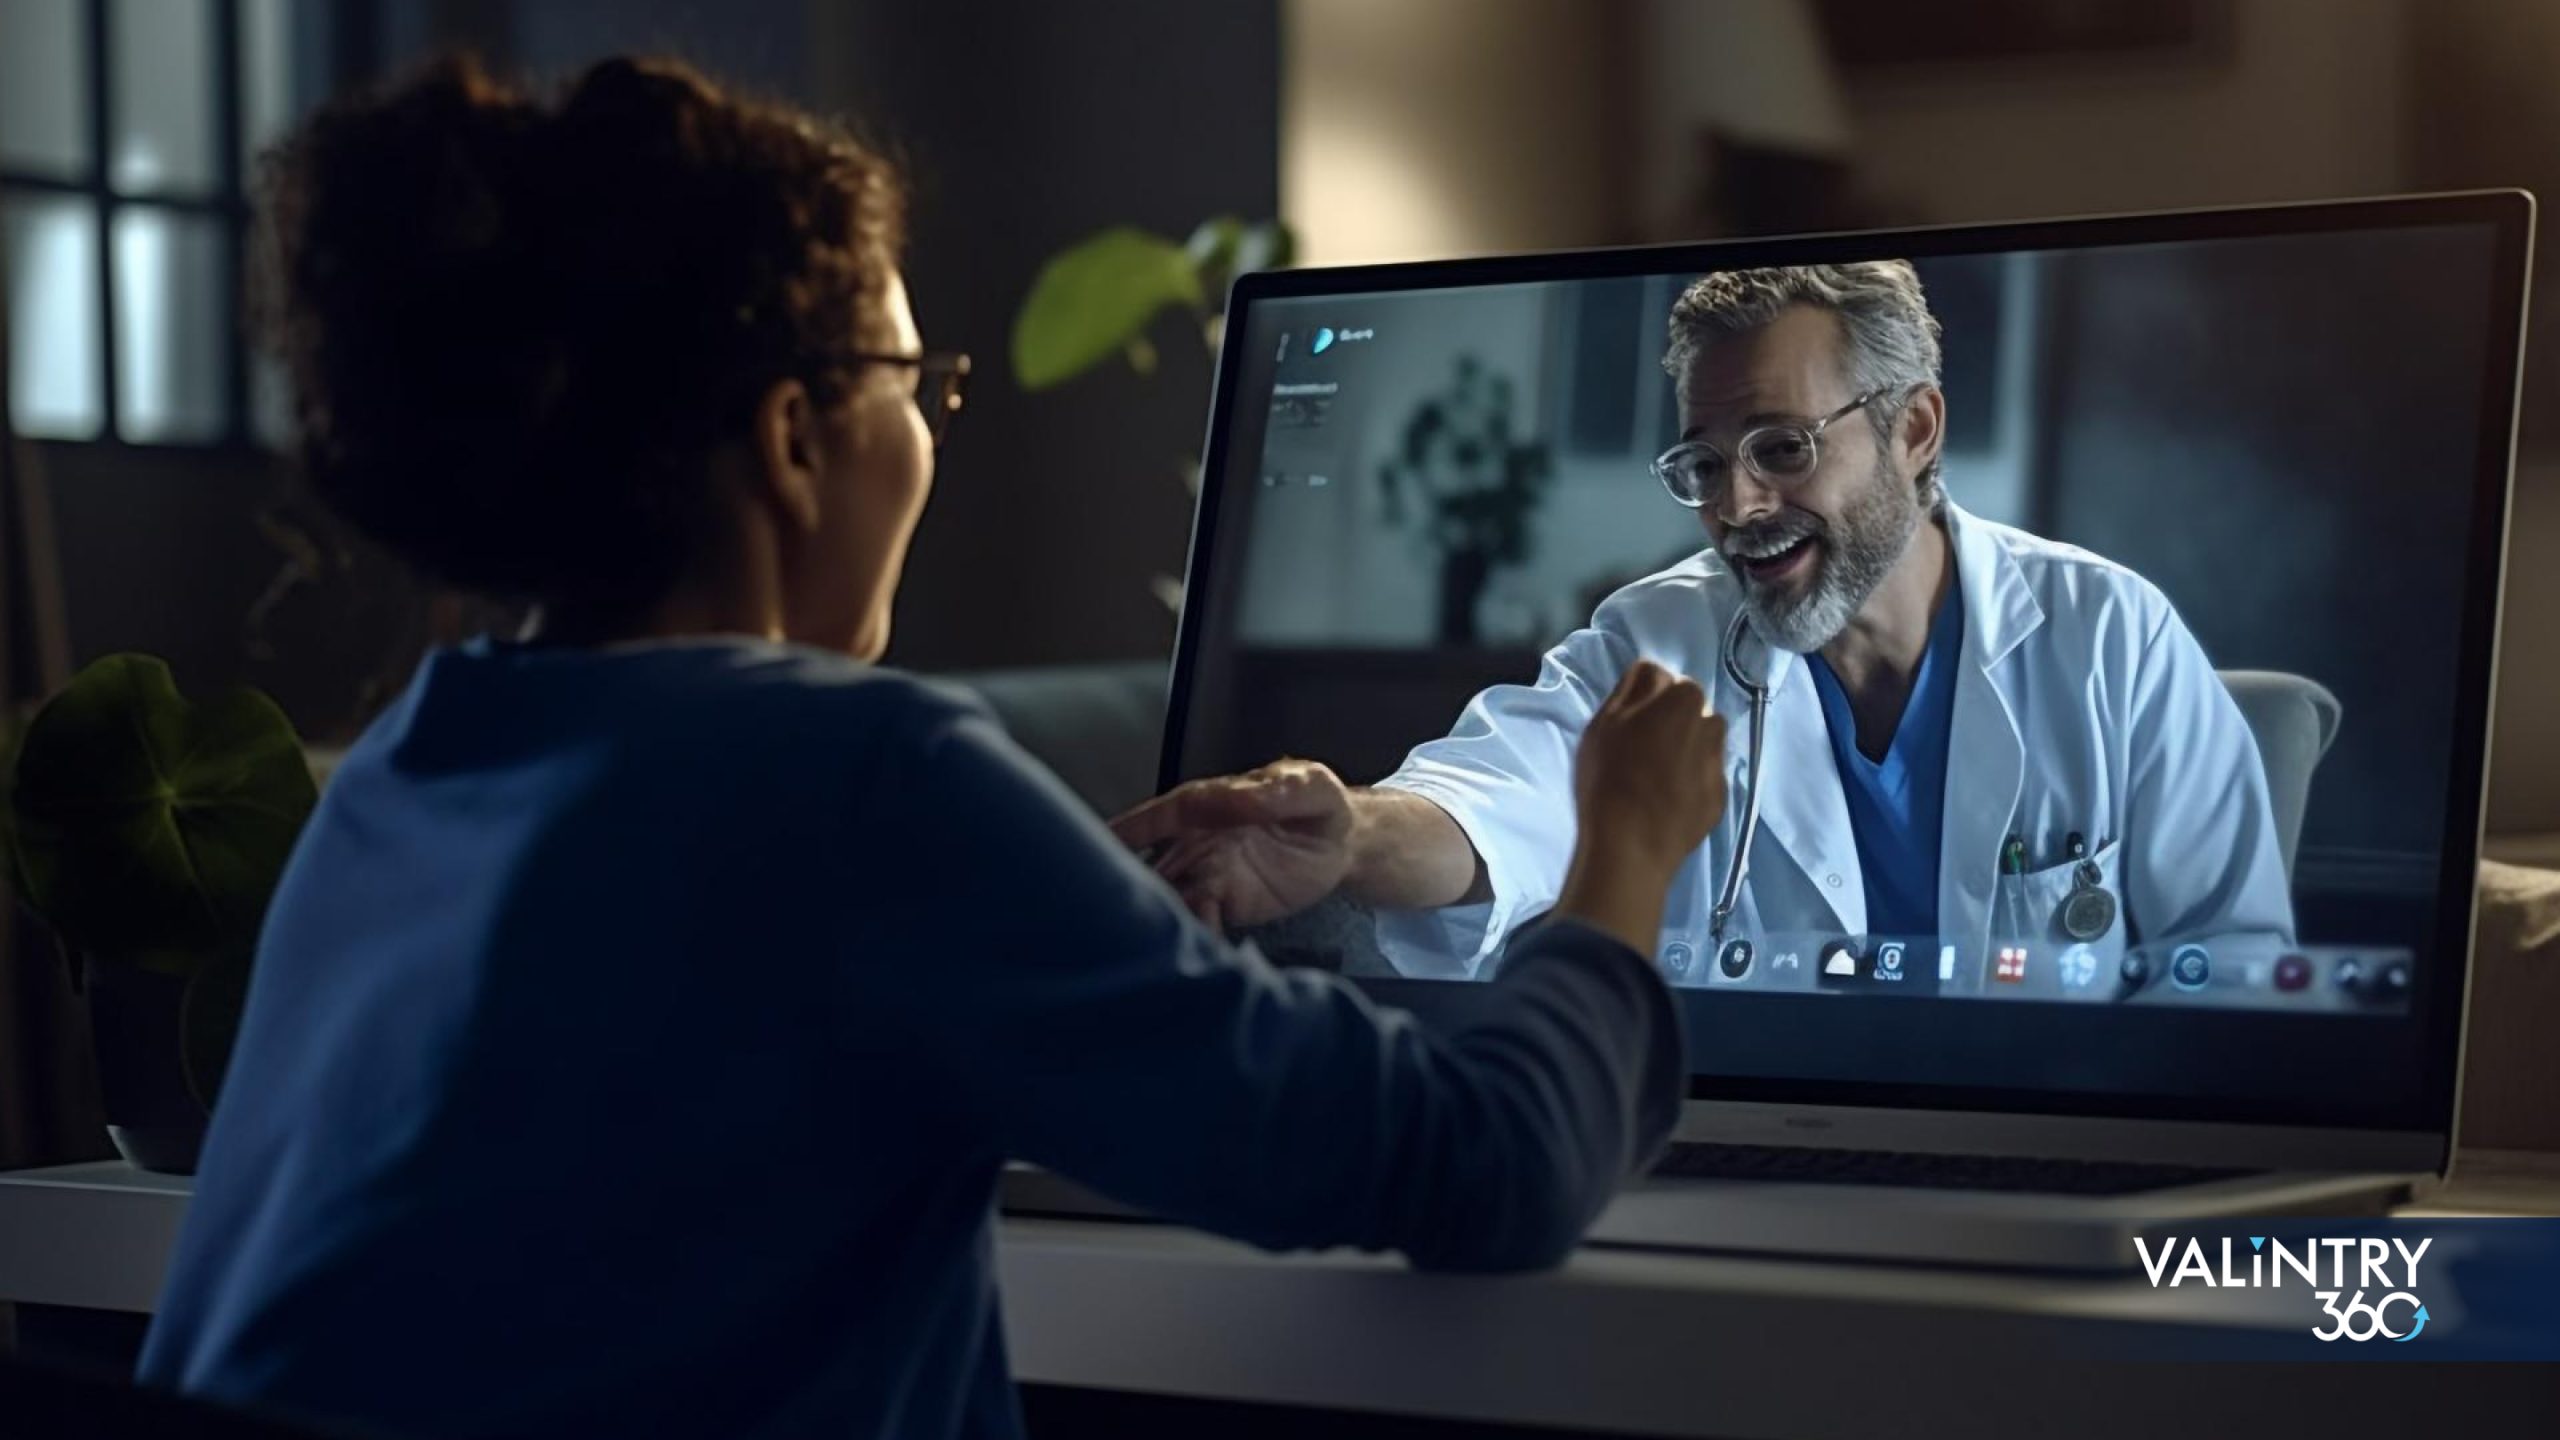 Importance of Deeper Patient Engagement through Two-Way Video